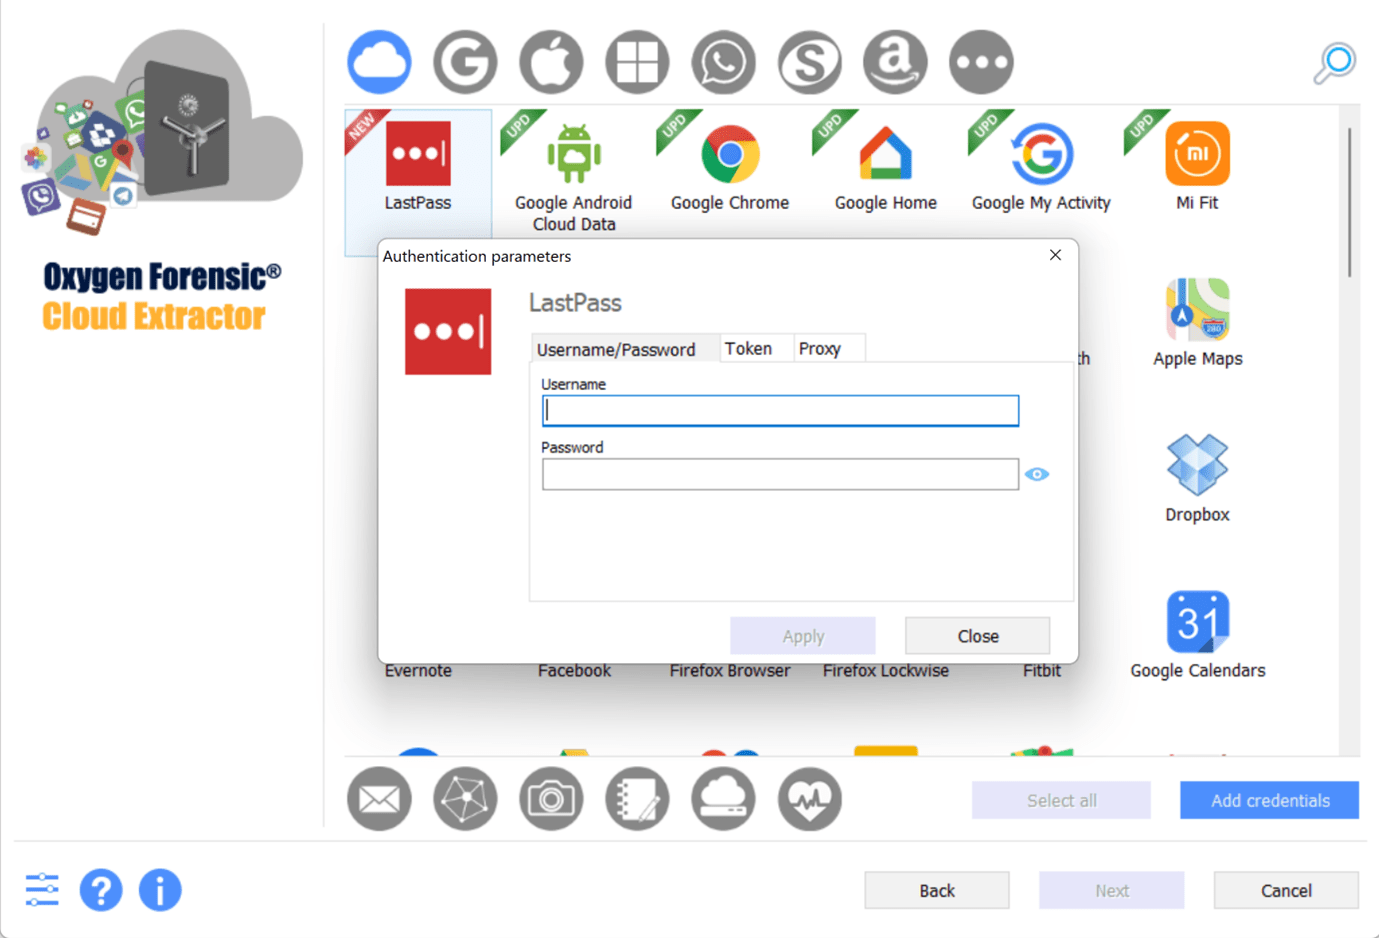 Screenshot of Cloud Extractor pop-up screen asking for LastPass authentication parameters